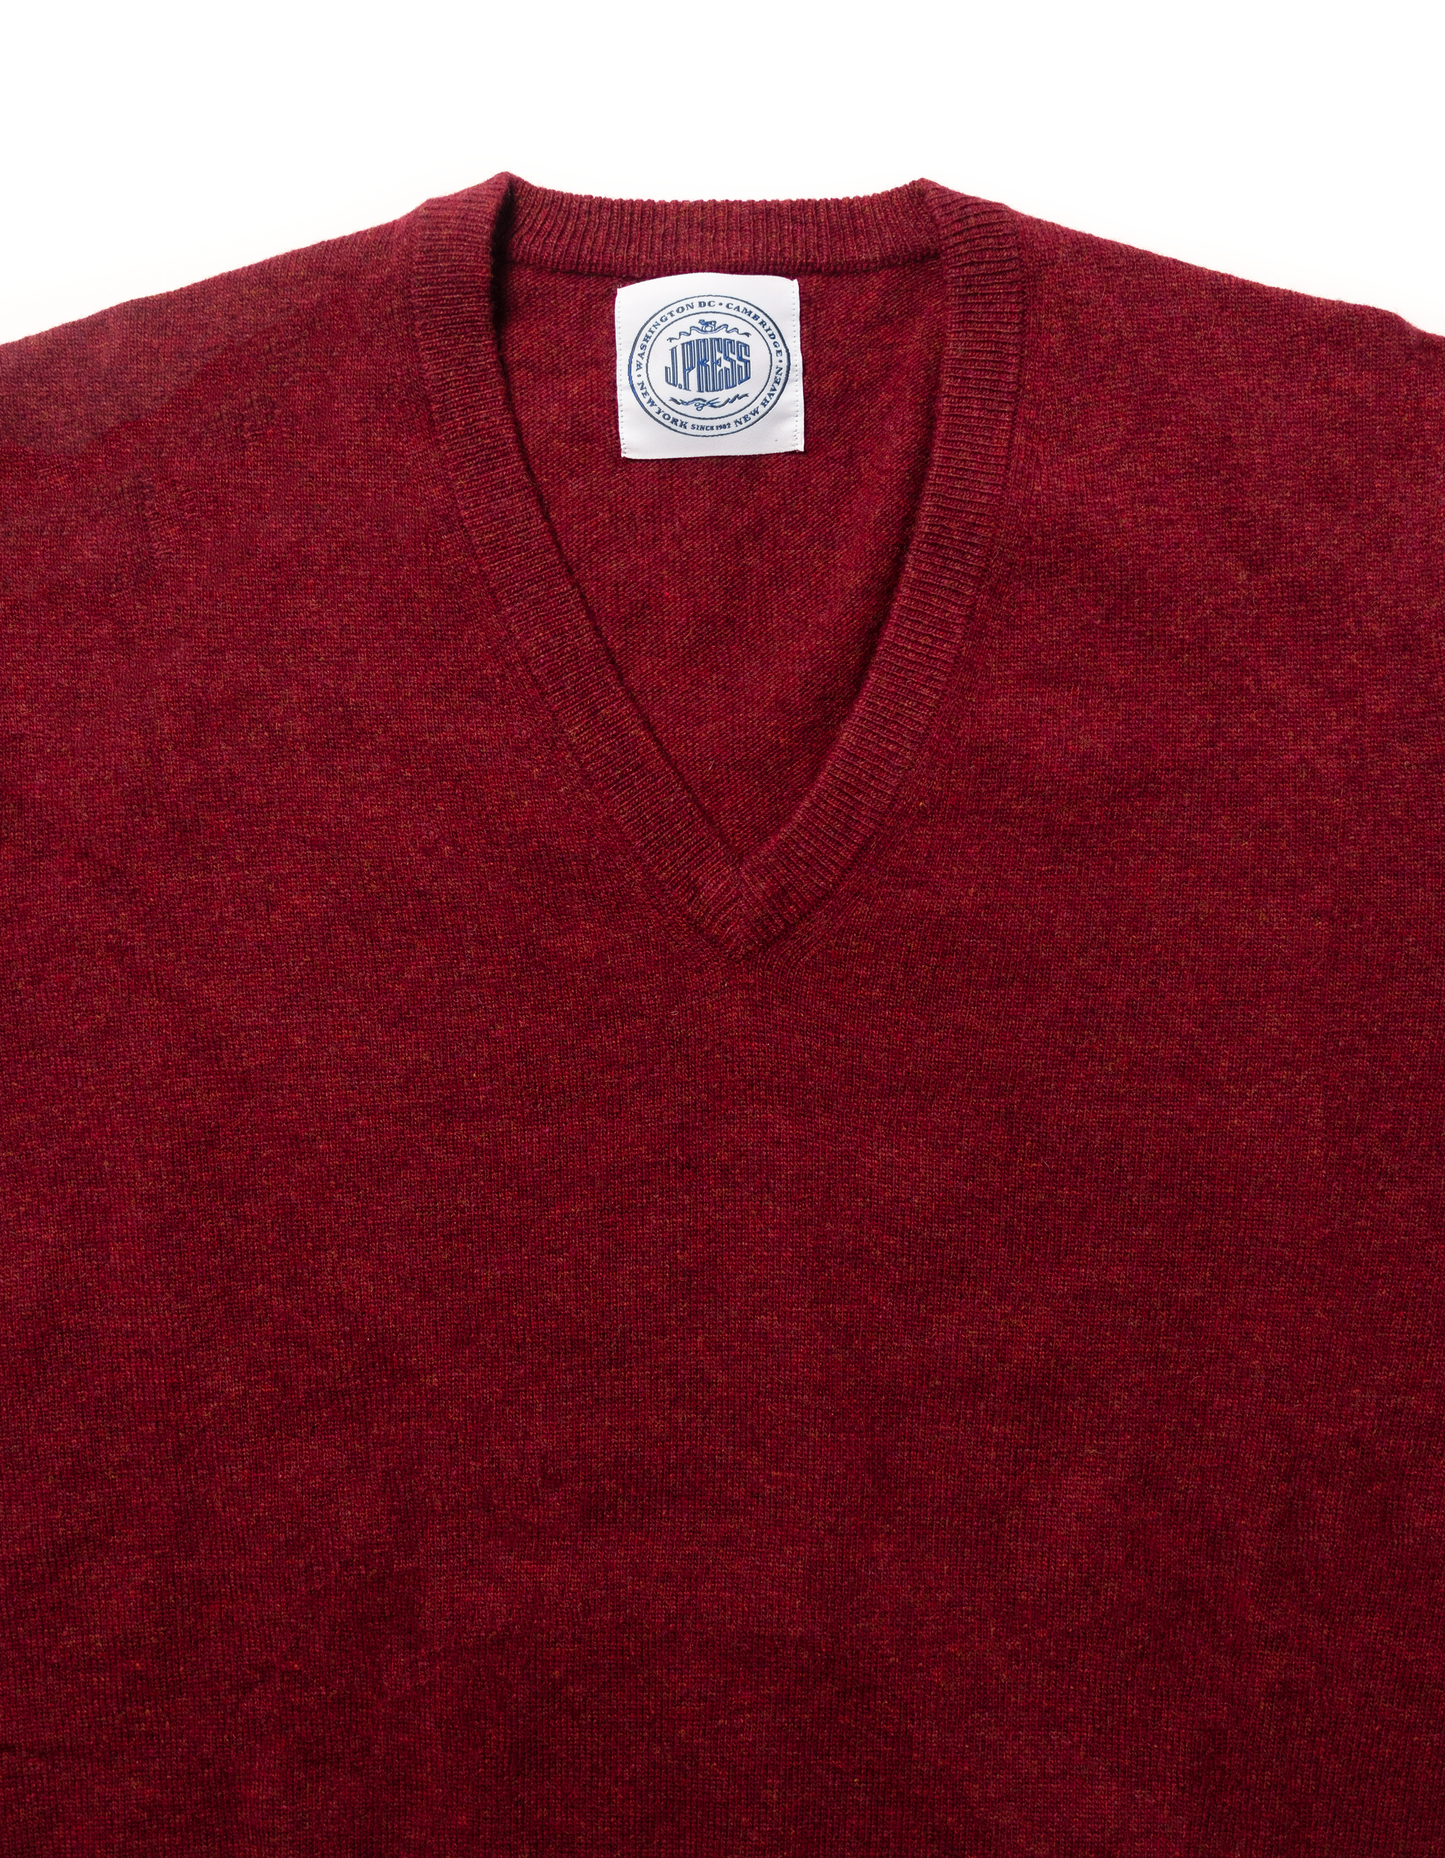 LAMBSWOOL GEELONG V NECK SWEATER - RED